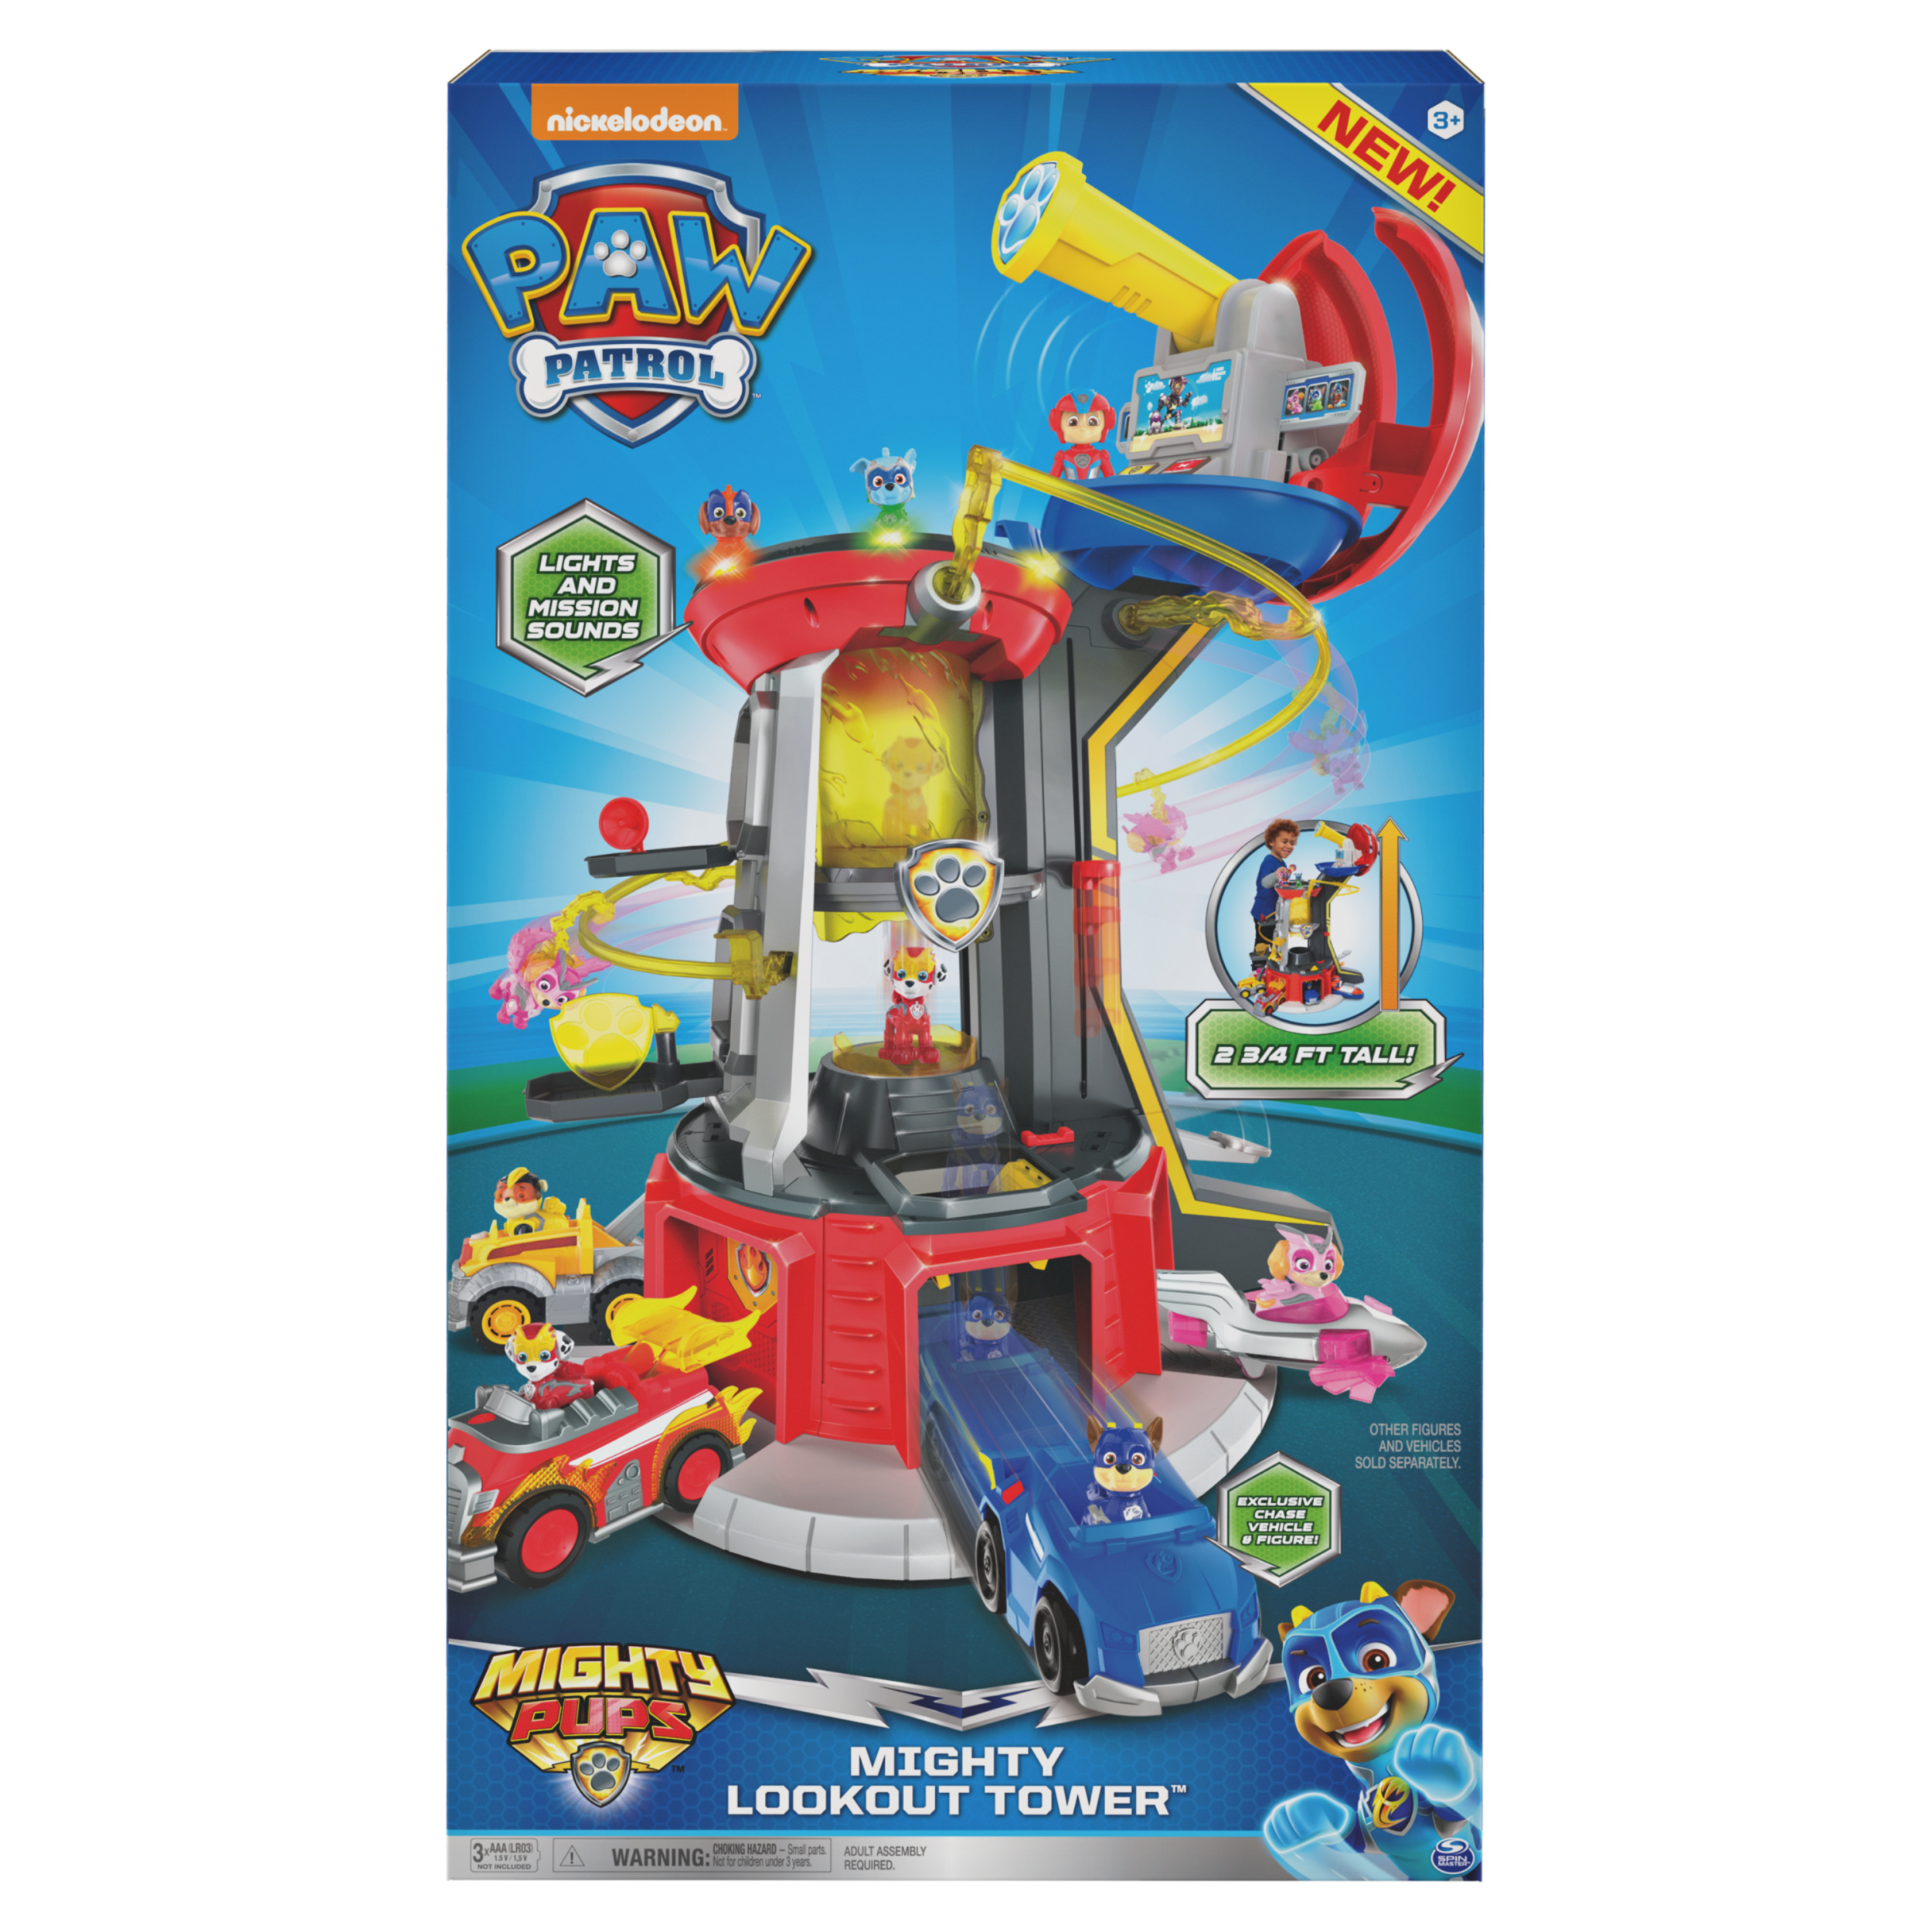 PAW Patrol, Mighty Pups Super PAWs Lookout Tower Playset with Lights and Sounds, Toy for Ages 3 and Up - image 2 of 8